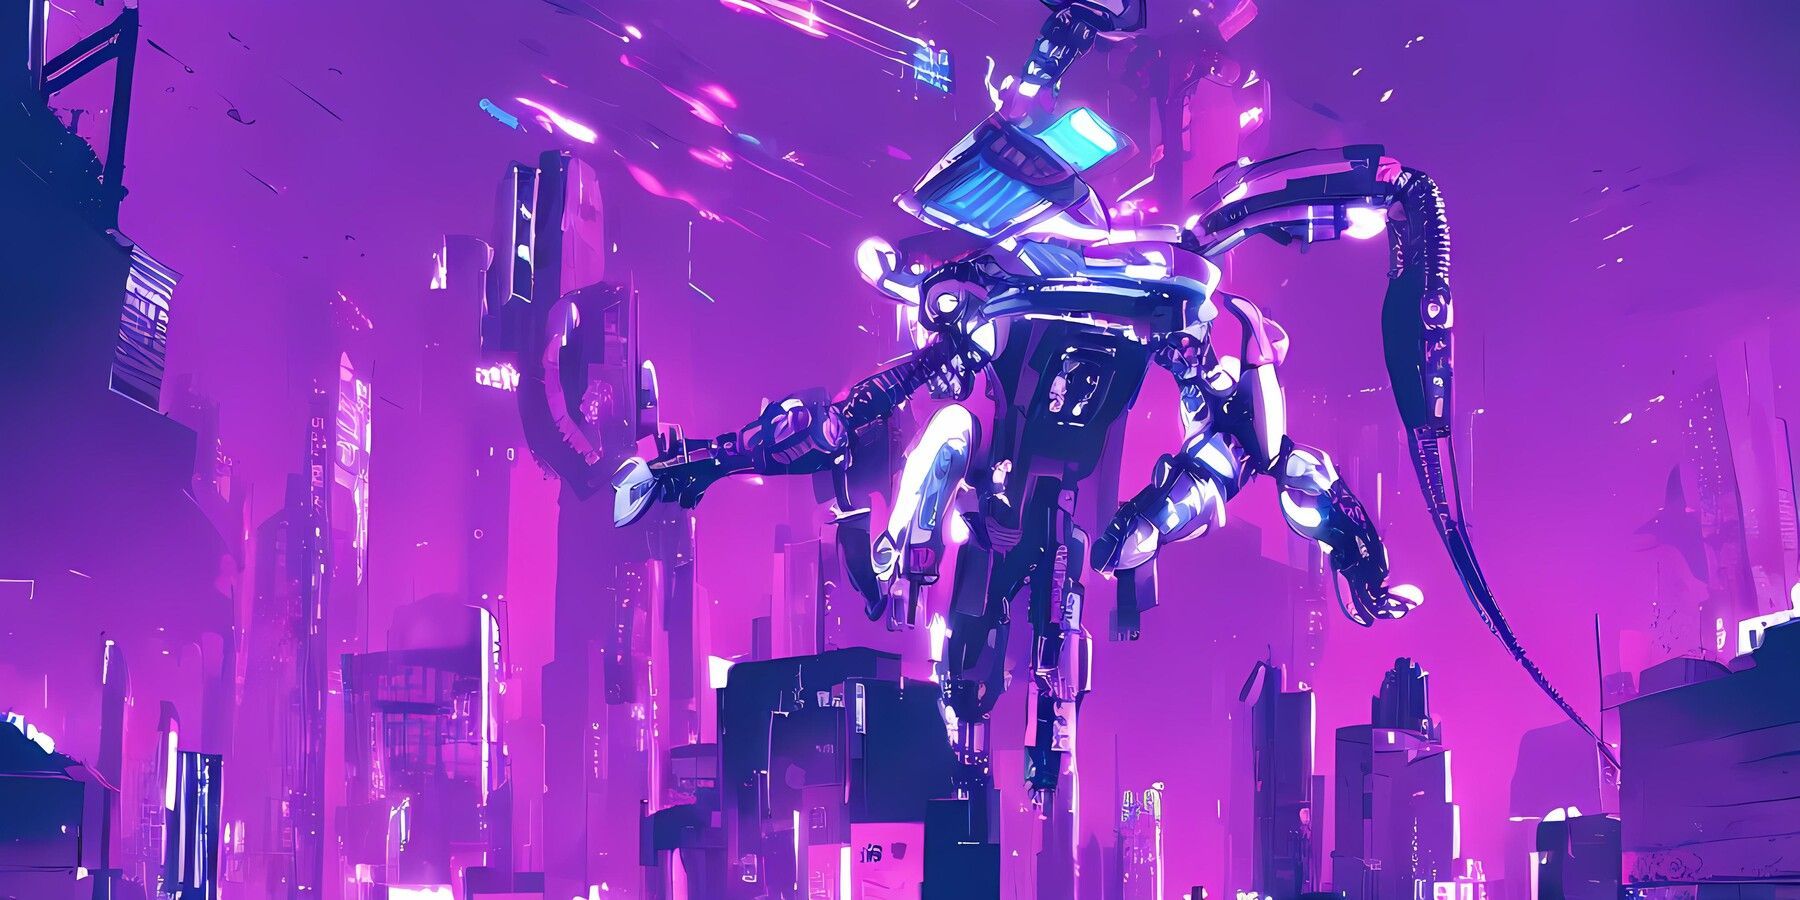 A giant robot with glowing purple circuits stands in a purple city - Cyberpunk